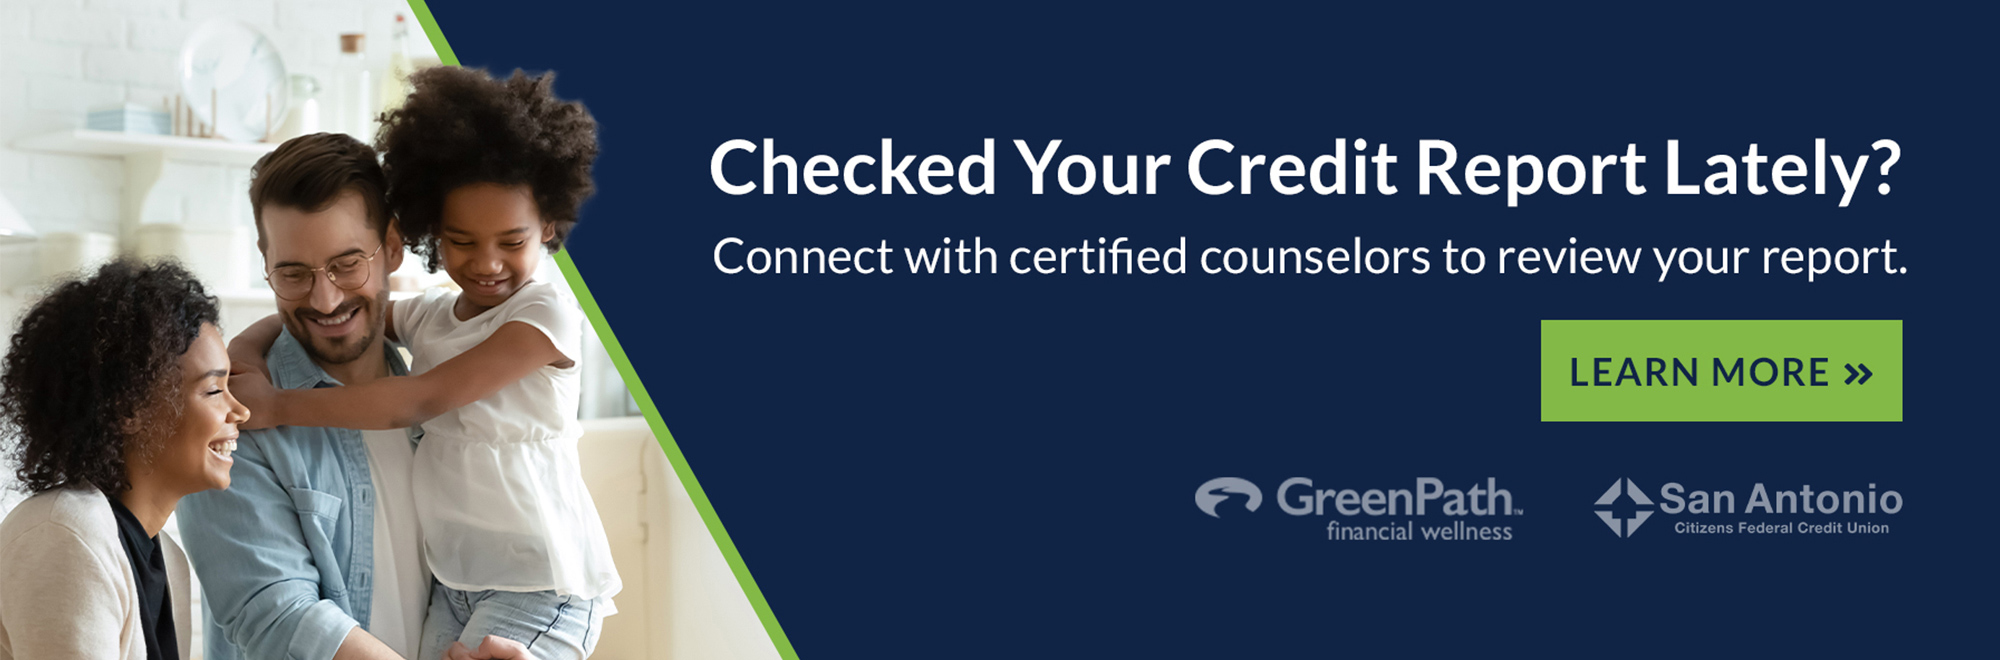 Checked Your Credit Report Lately? Connect with certified counselors to review your report.